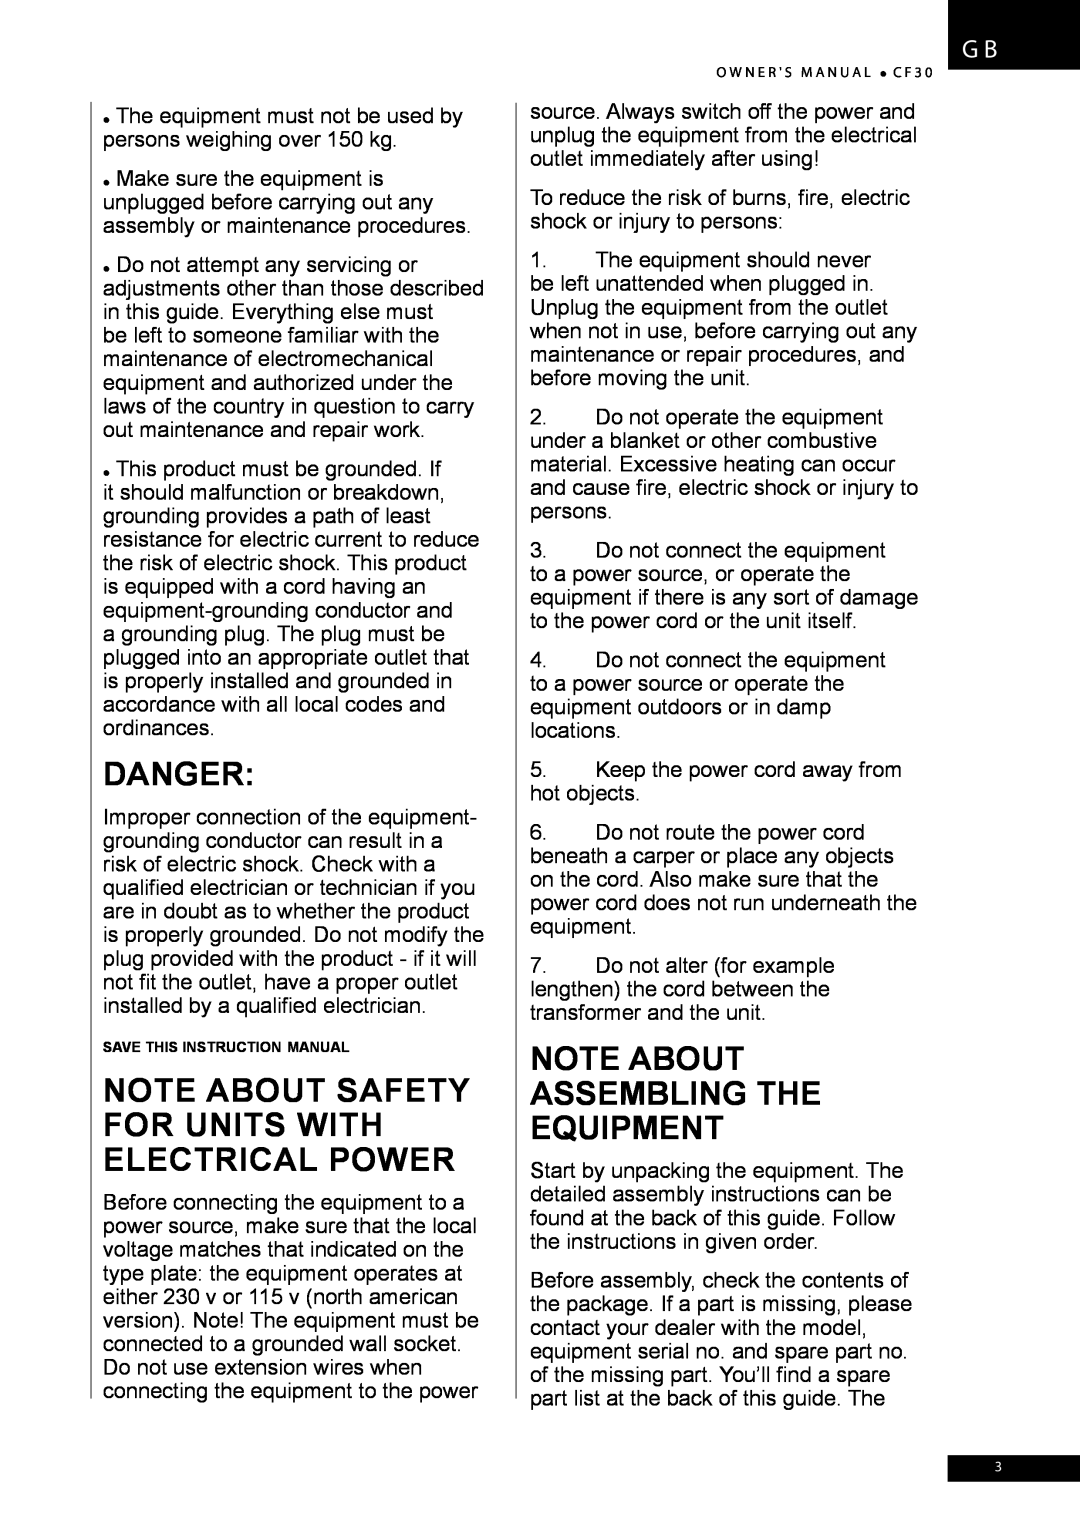 Tunturi CF30 owner manual Danger, Note about safety for units with electrical power, Note about assembling the equipment 